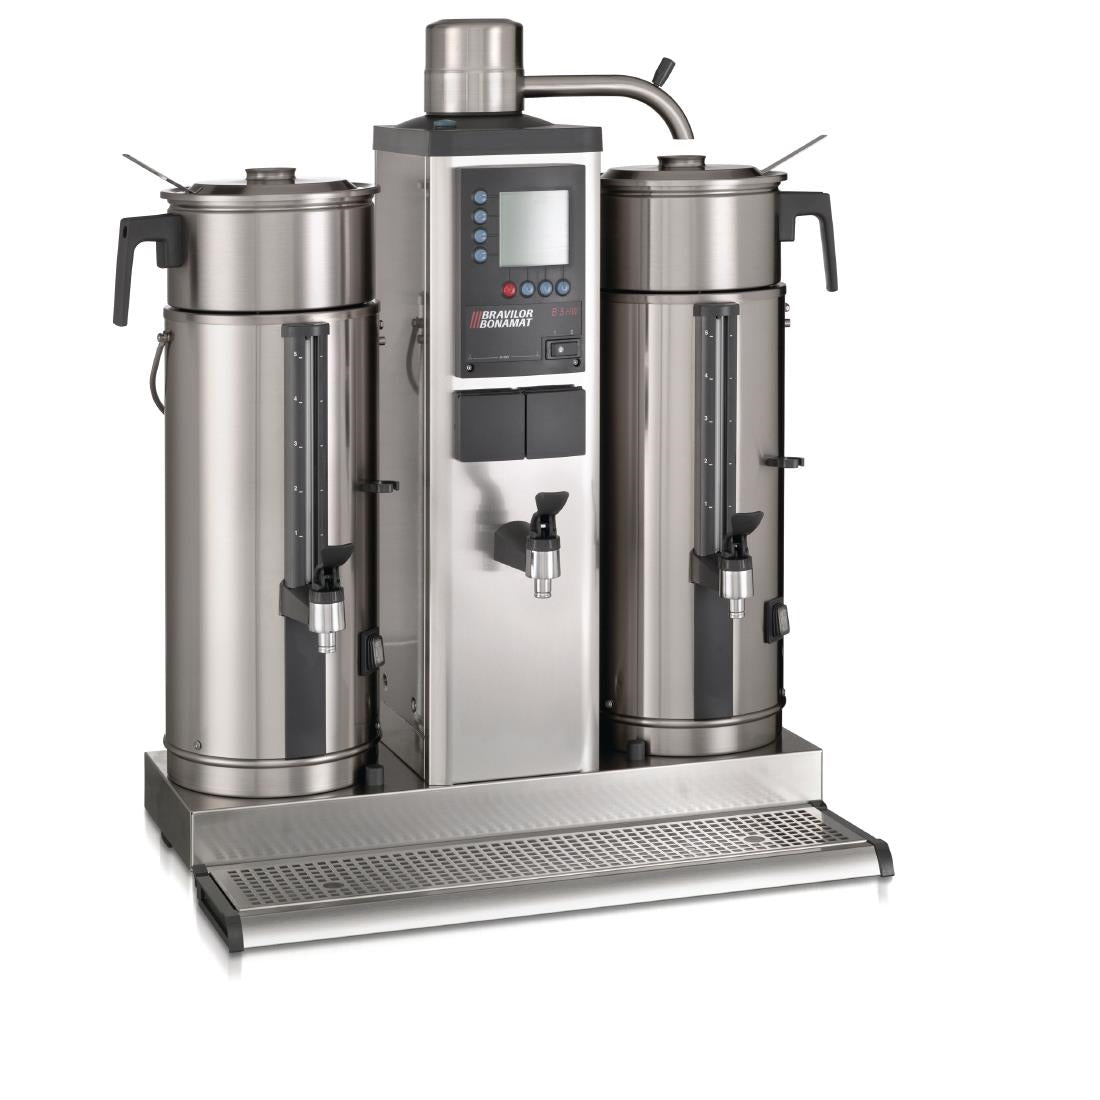 DC687-1P Bravilor B5 HW Bulk Coffee Brewer with 2x5Ltr Coffee Urns and Hot Water Tap Single Phase JD Catering Equipment Solutions Ltd